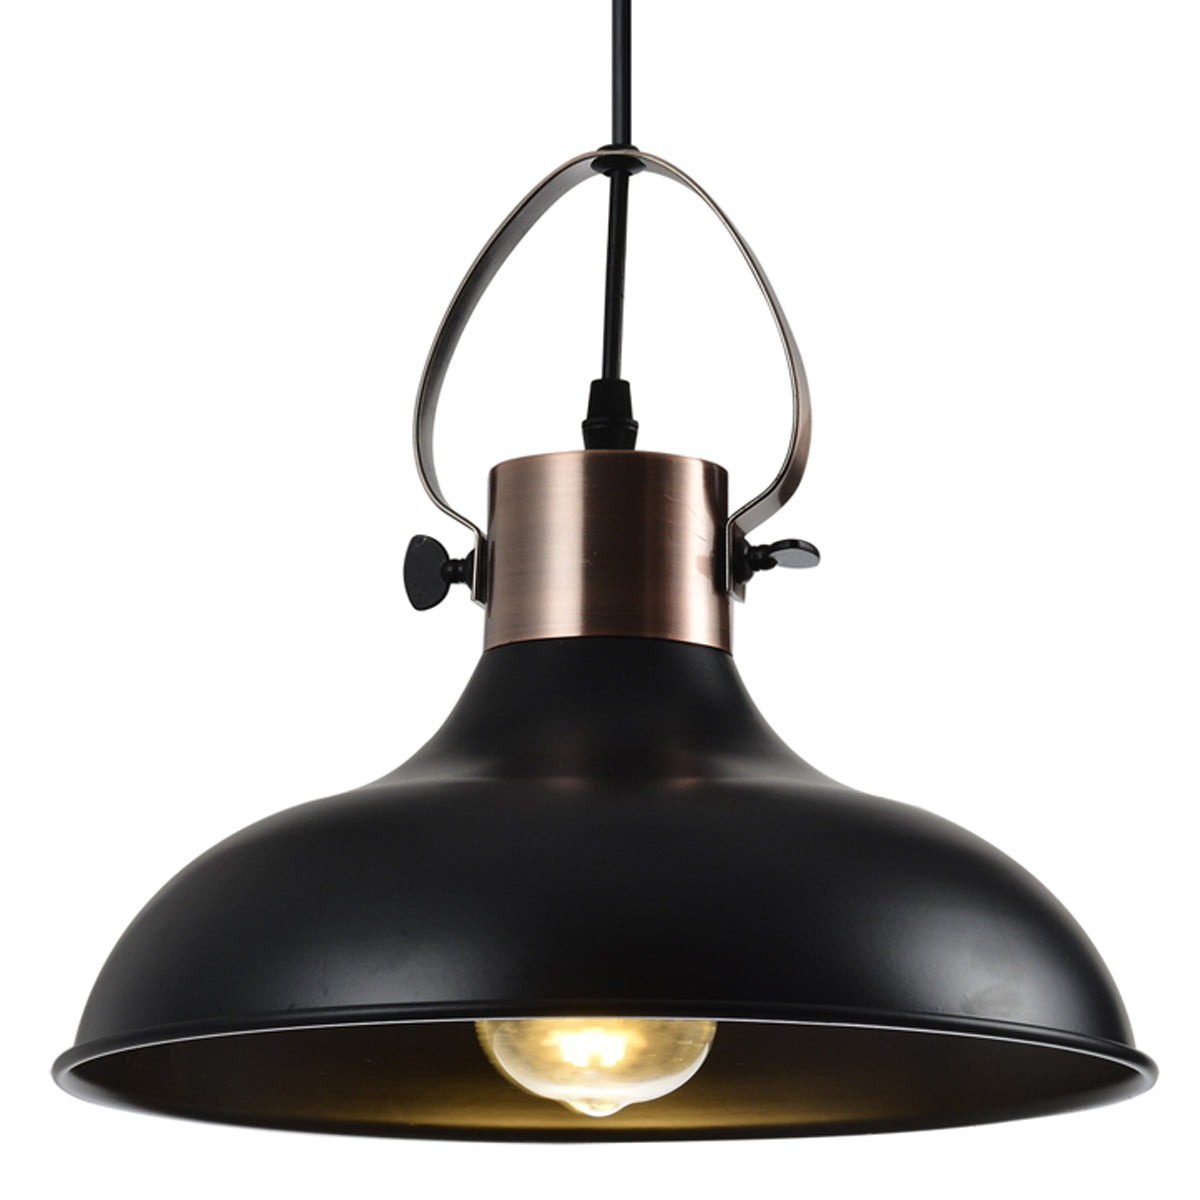 Our popular Wanda ceiling light, comes in a signature dome shape with contrasting top. It is height-adjustable at the point of installation so you can position it to your exact requirements. One E27 bulb is required and as it enhances such a warm and inviting glow, would look great above kitchen islands, dining tables or as main light fitting in any room.